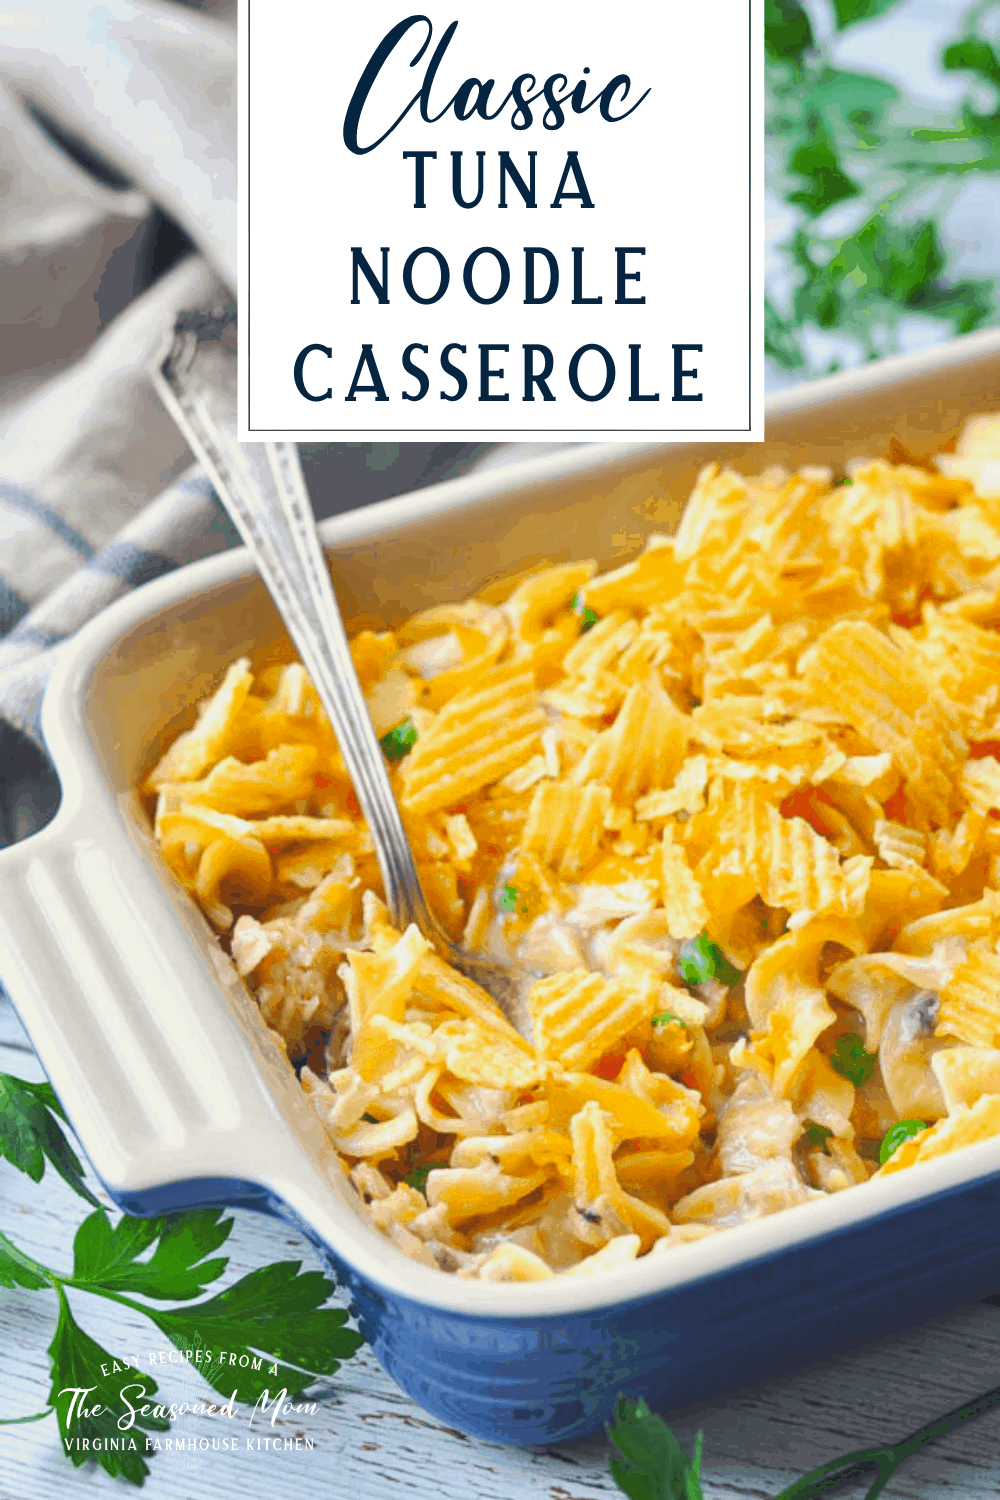 Side shot of a blue dish full of campbells tuna noodle casserole with a text title box at the top